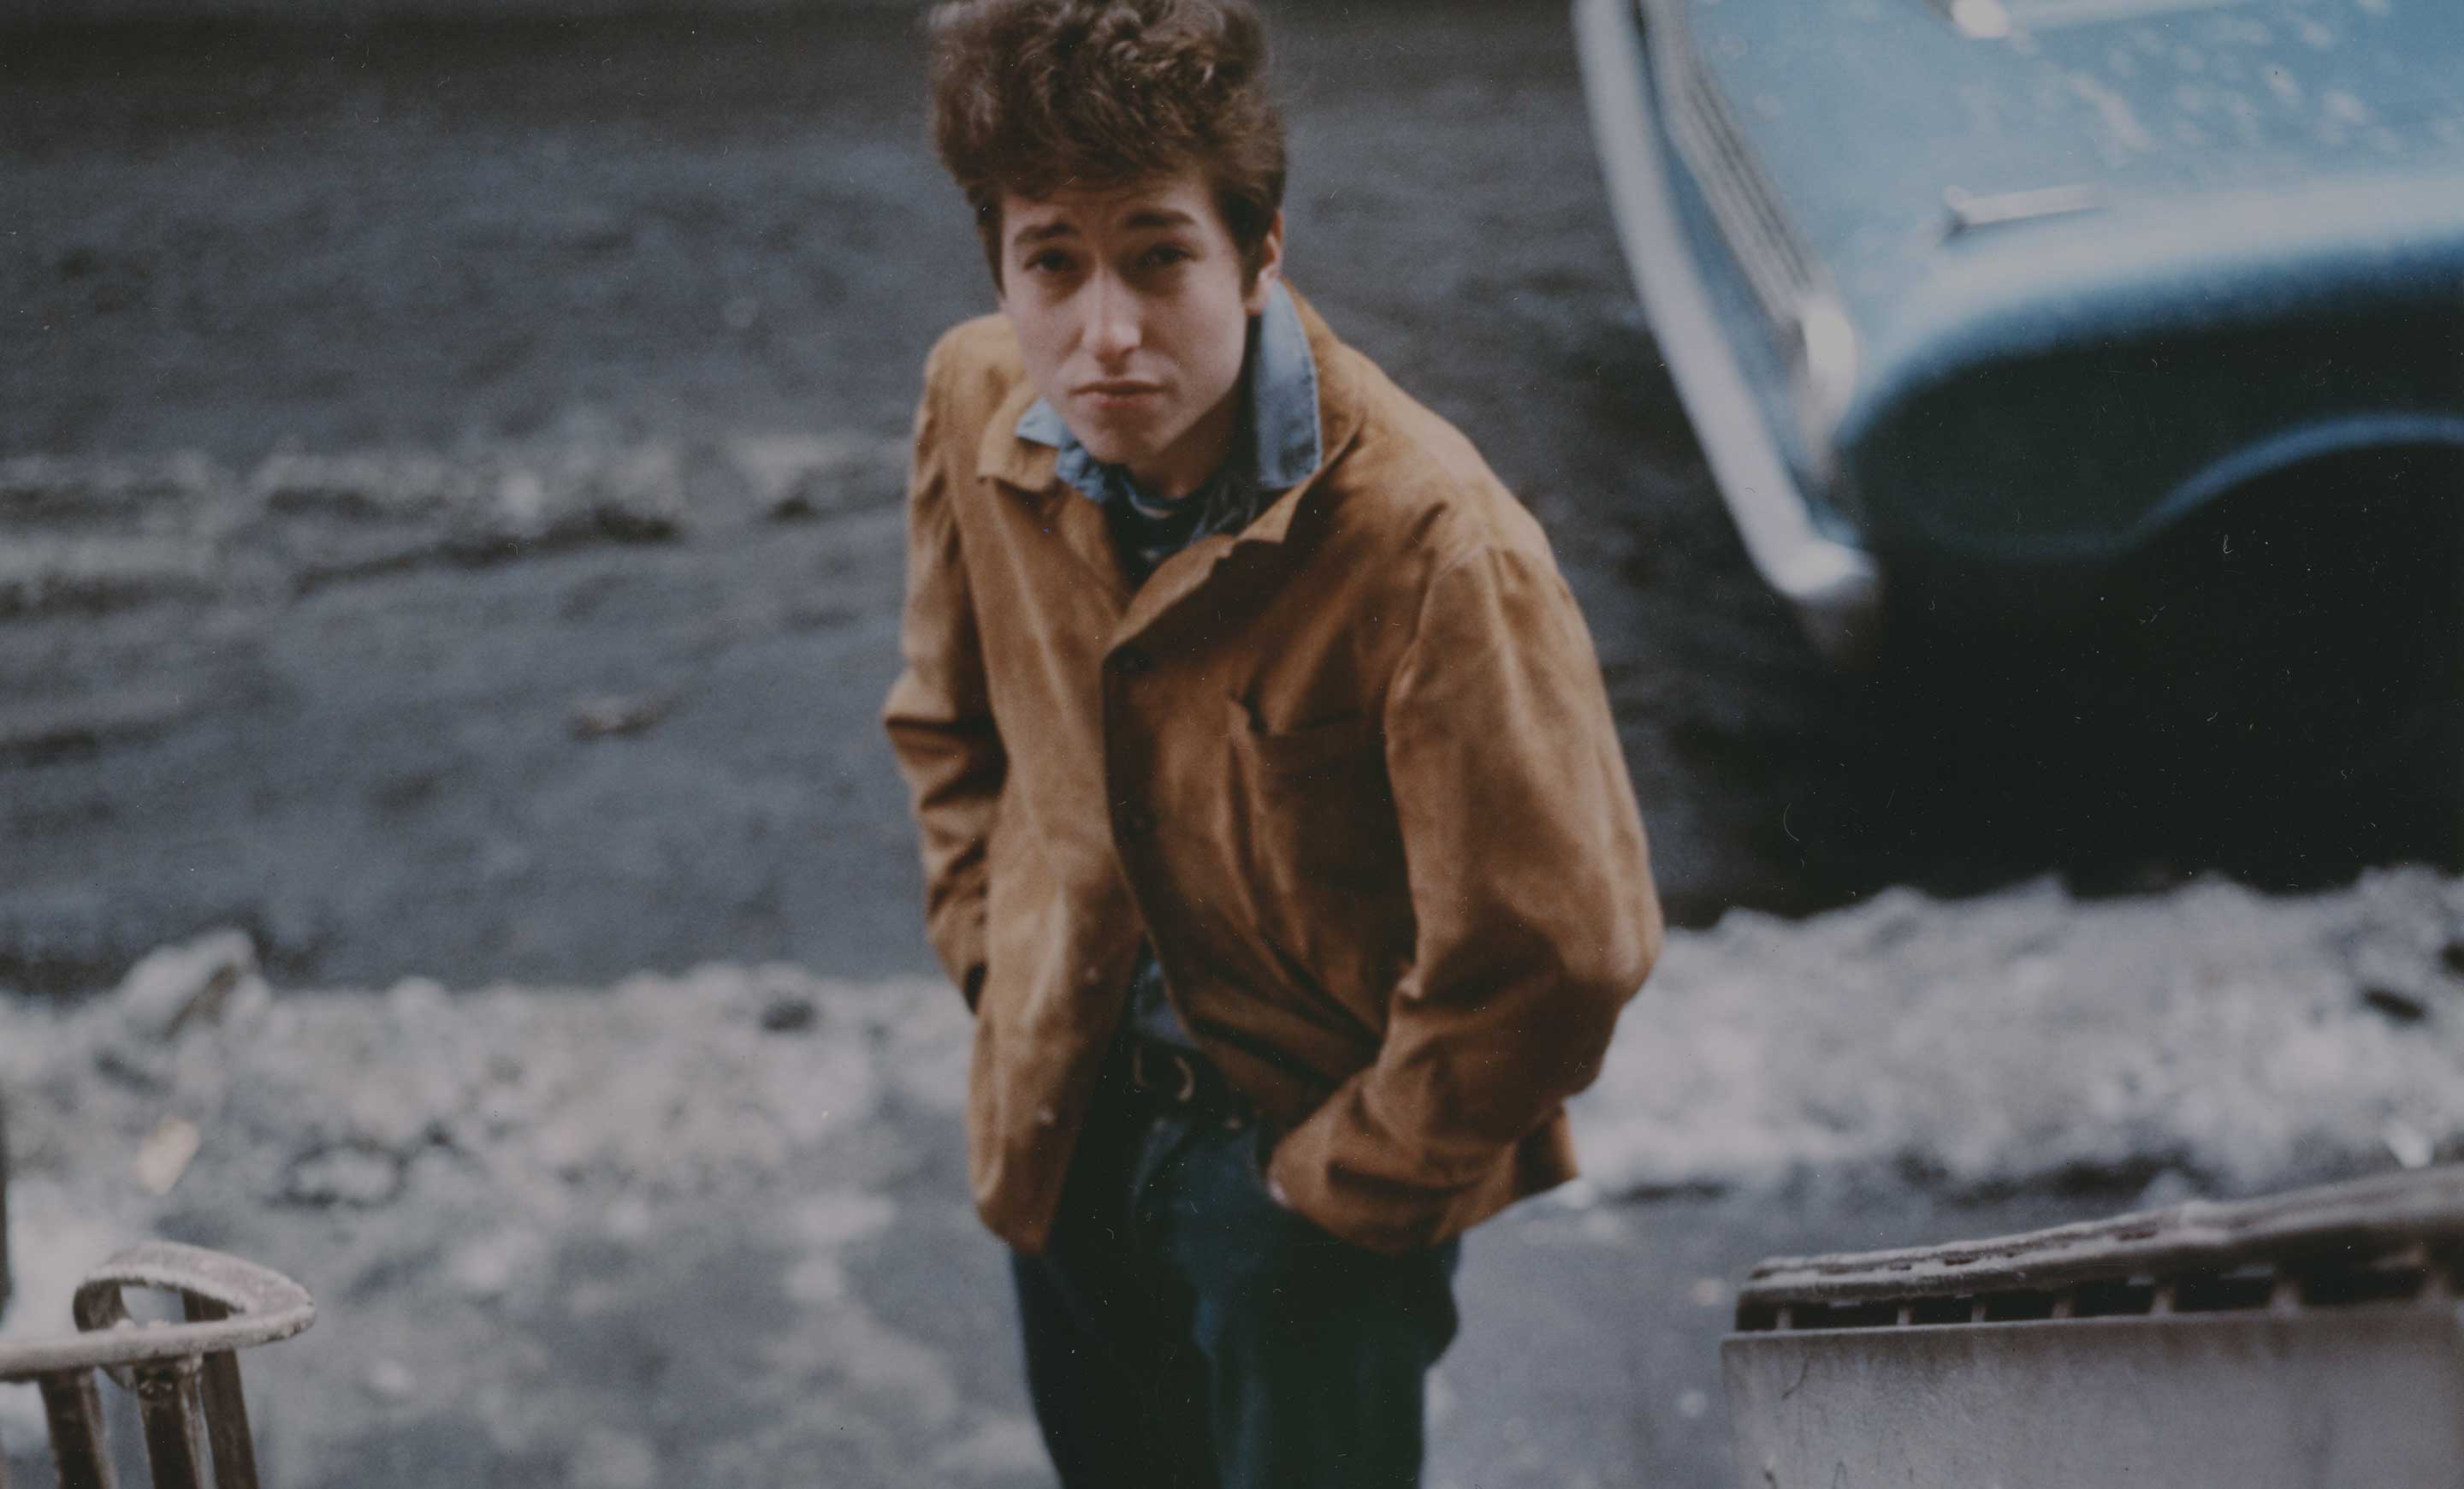 &quot;The Voice of Generation&quot;!!! It's Bob Dylan! (1962-1966 Dylan)